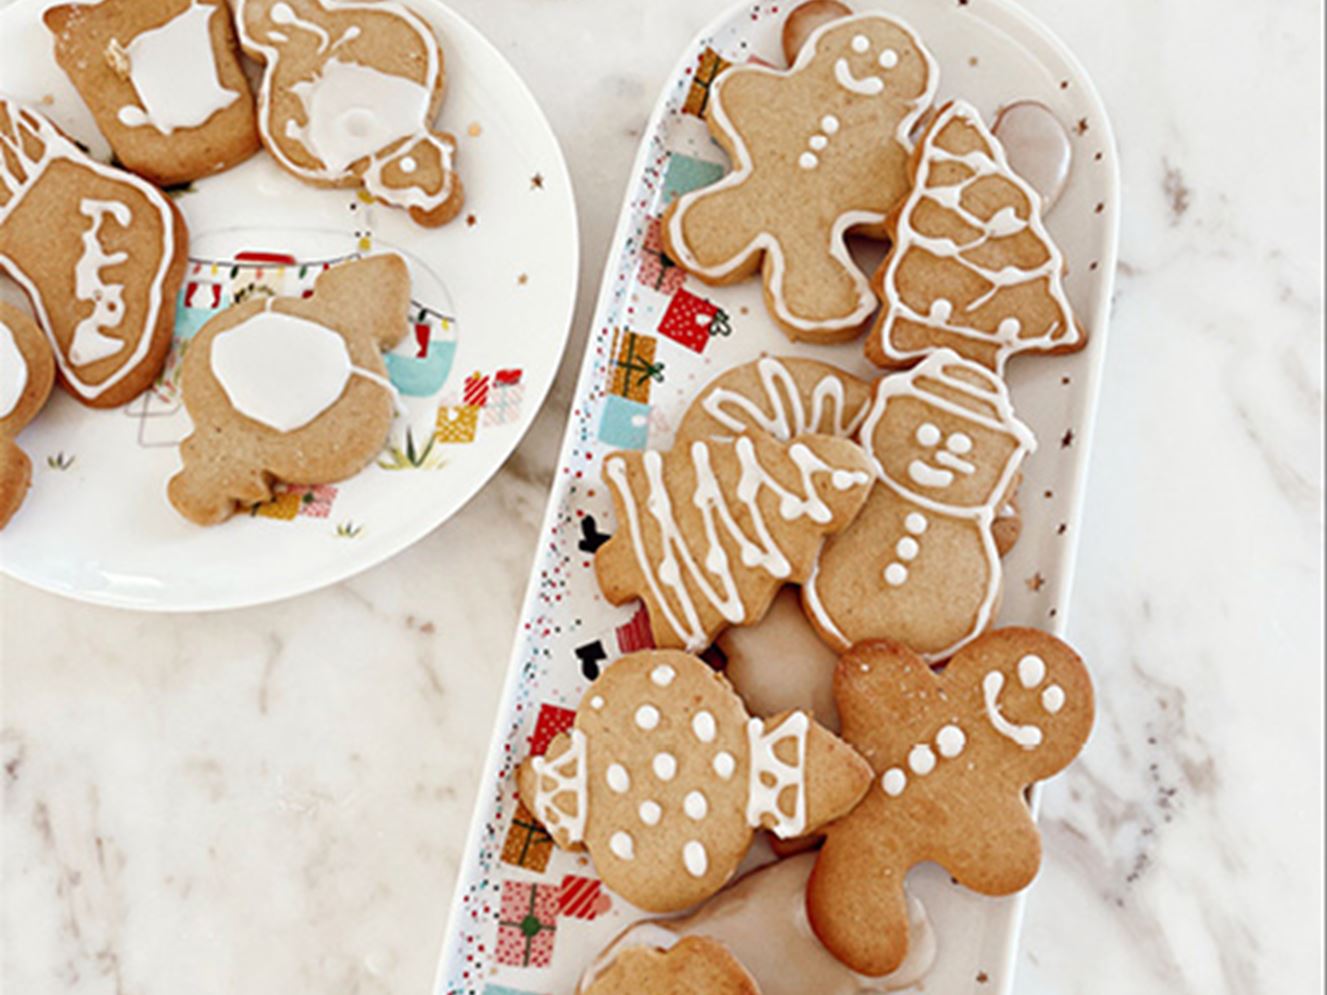 Plate of Christmas gingerbread cookies on white marble bench